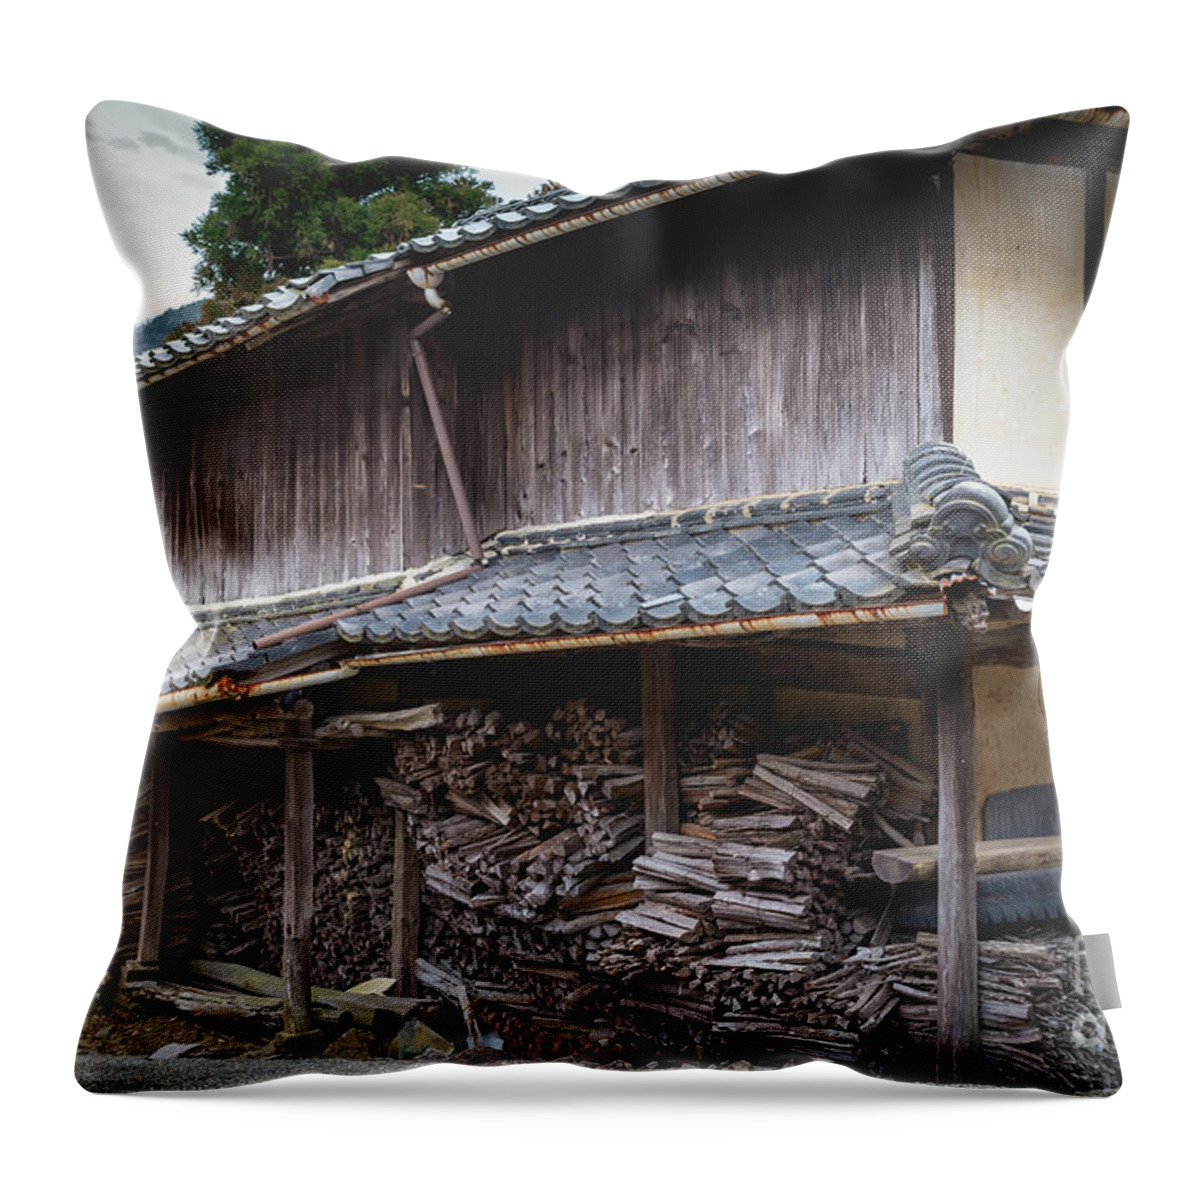 Pottery Throw Pillow featuring the photograph Village Pottery, Japan by Perry Rodriguez